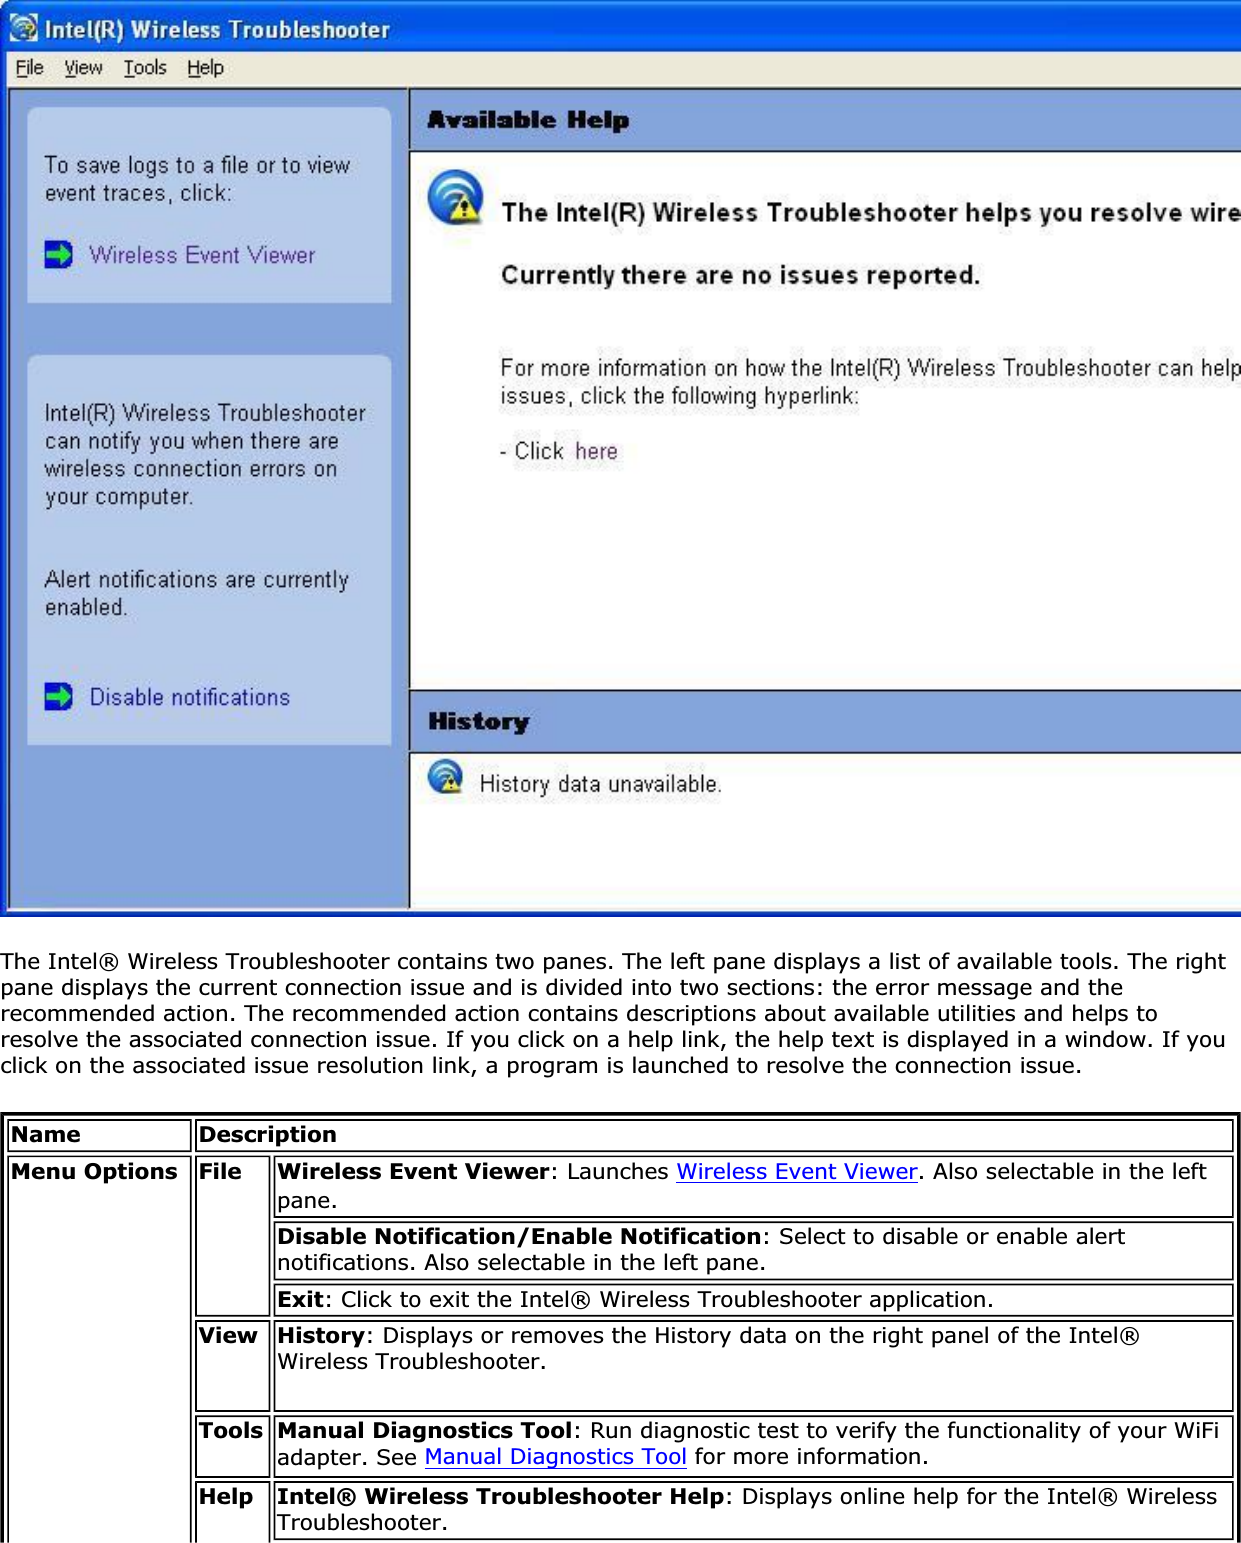 The Intel® Wireless Troubleshooter contains two panes. The left pane displays a list of available tools. The right pane displays the current connection issue and is divided into two sections: the error message and the recommended action. The recommended action contains descriptions about available utilities and helps to resolve the associated connection issue. If you click on a help link, the help text is displayed in a window. If you click on the associated issue resolution link, a program is launched to resolve the connection issue.Name DescriptionMenu Options File Wireless Event Viewer: Launches Wireless Event Viewer. Also selectable in the left pane.Disable Notification/Enable Notification: Select to disable or enable alert notifications. Also selectable in the left pane.Exit: Click to exit the Intel® Wireless Troubleshooter application.View History: Displays or removes the History data on the right panel of the Intel® Wireless Troubleshooter.Tools Manual Diagnostics Tool: Run diagnostic test to verify the functionality of your WiFi adapter. See Manual Diagnostics Tool for more information.Help Intel® Wireless Troubleshooter Help: Displays online help for the Intel® Wireless Troubleshooter.